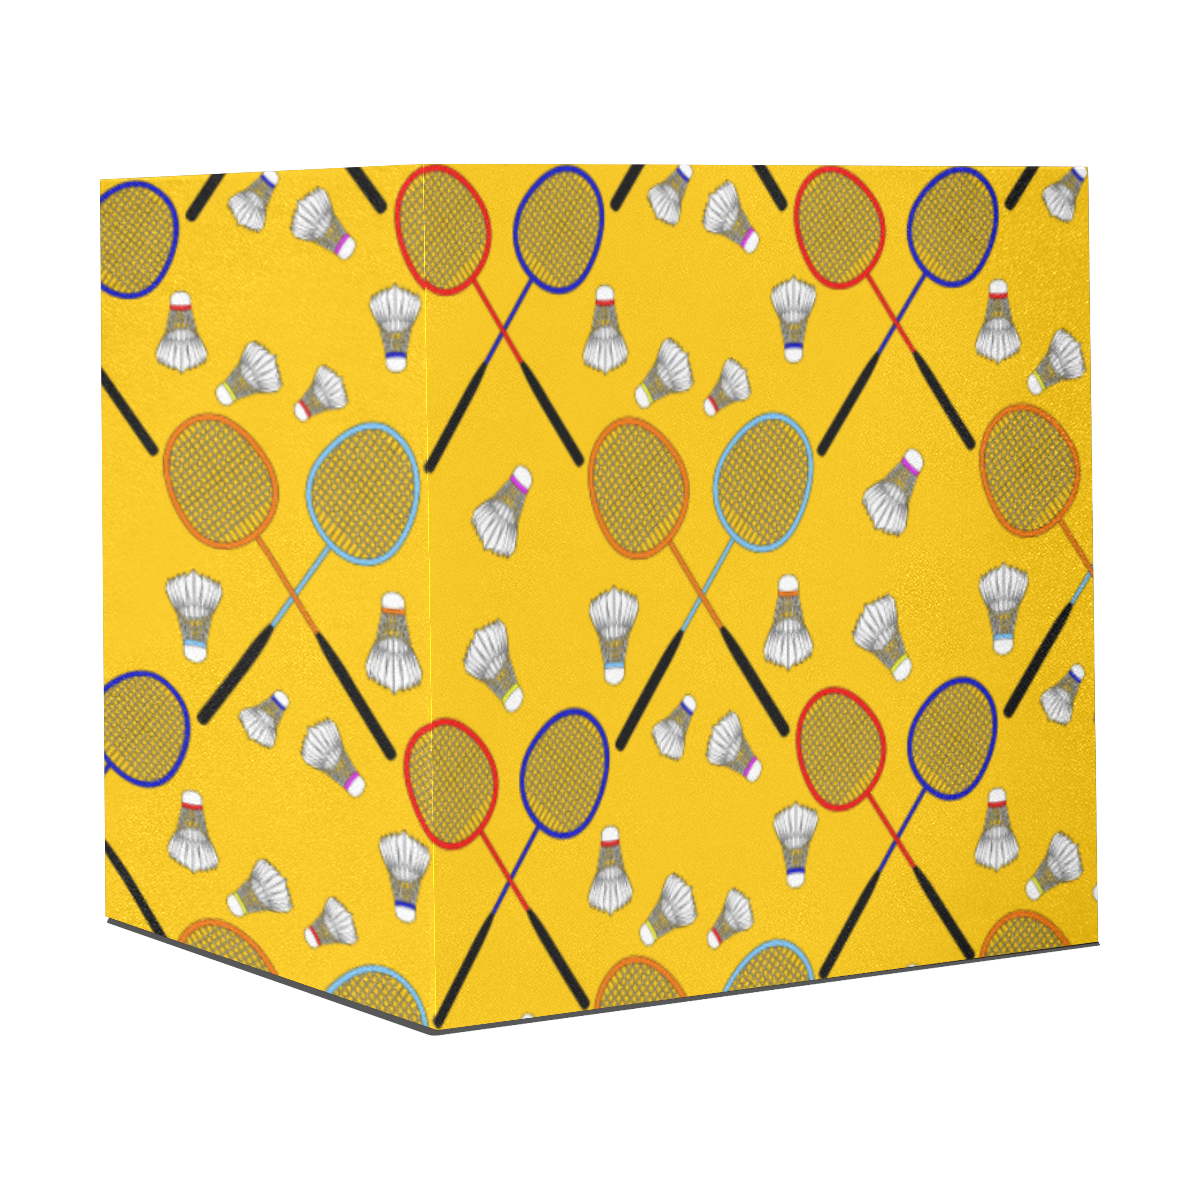 Badminton Rackets and Shuttlecocks Pattern Sports Yellow Gift Wrapping Paper 58"x 23" (3 Rolls)